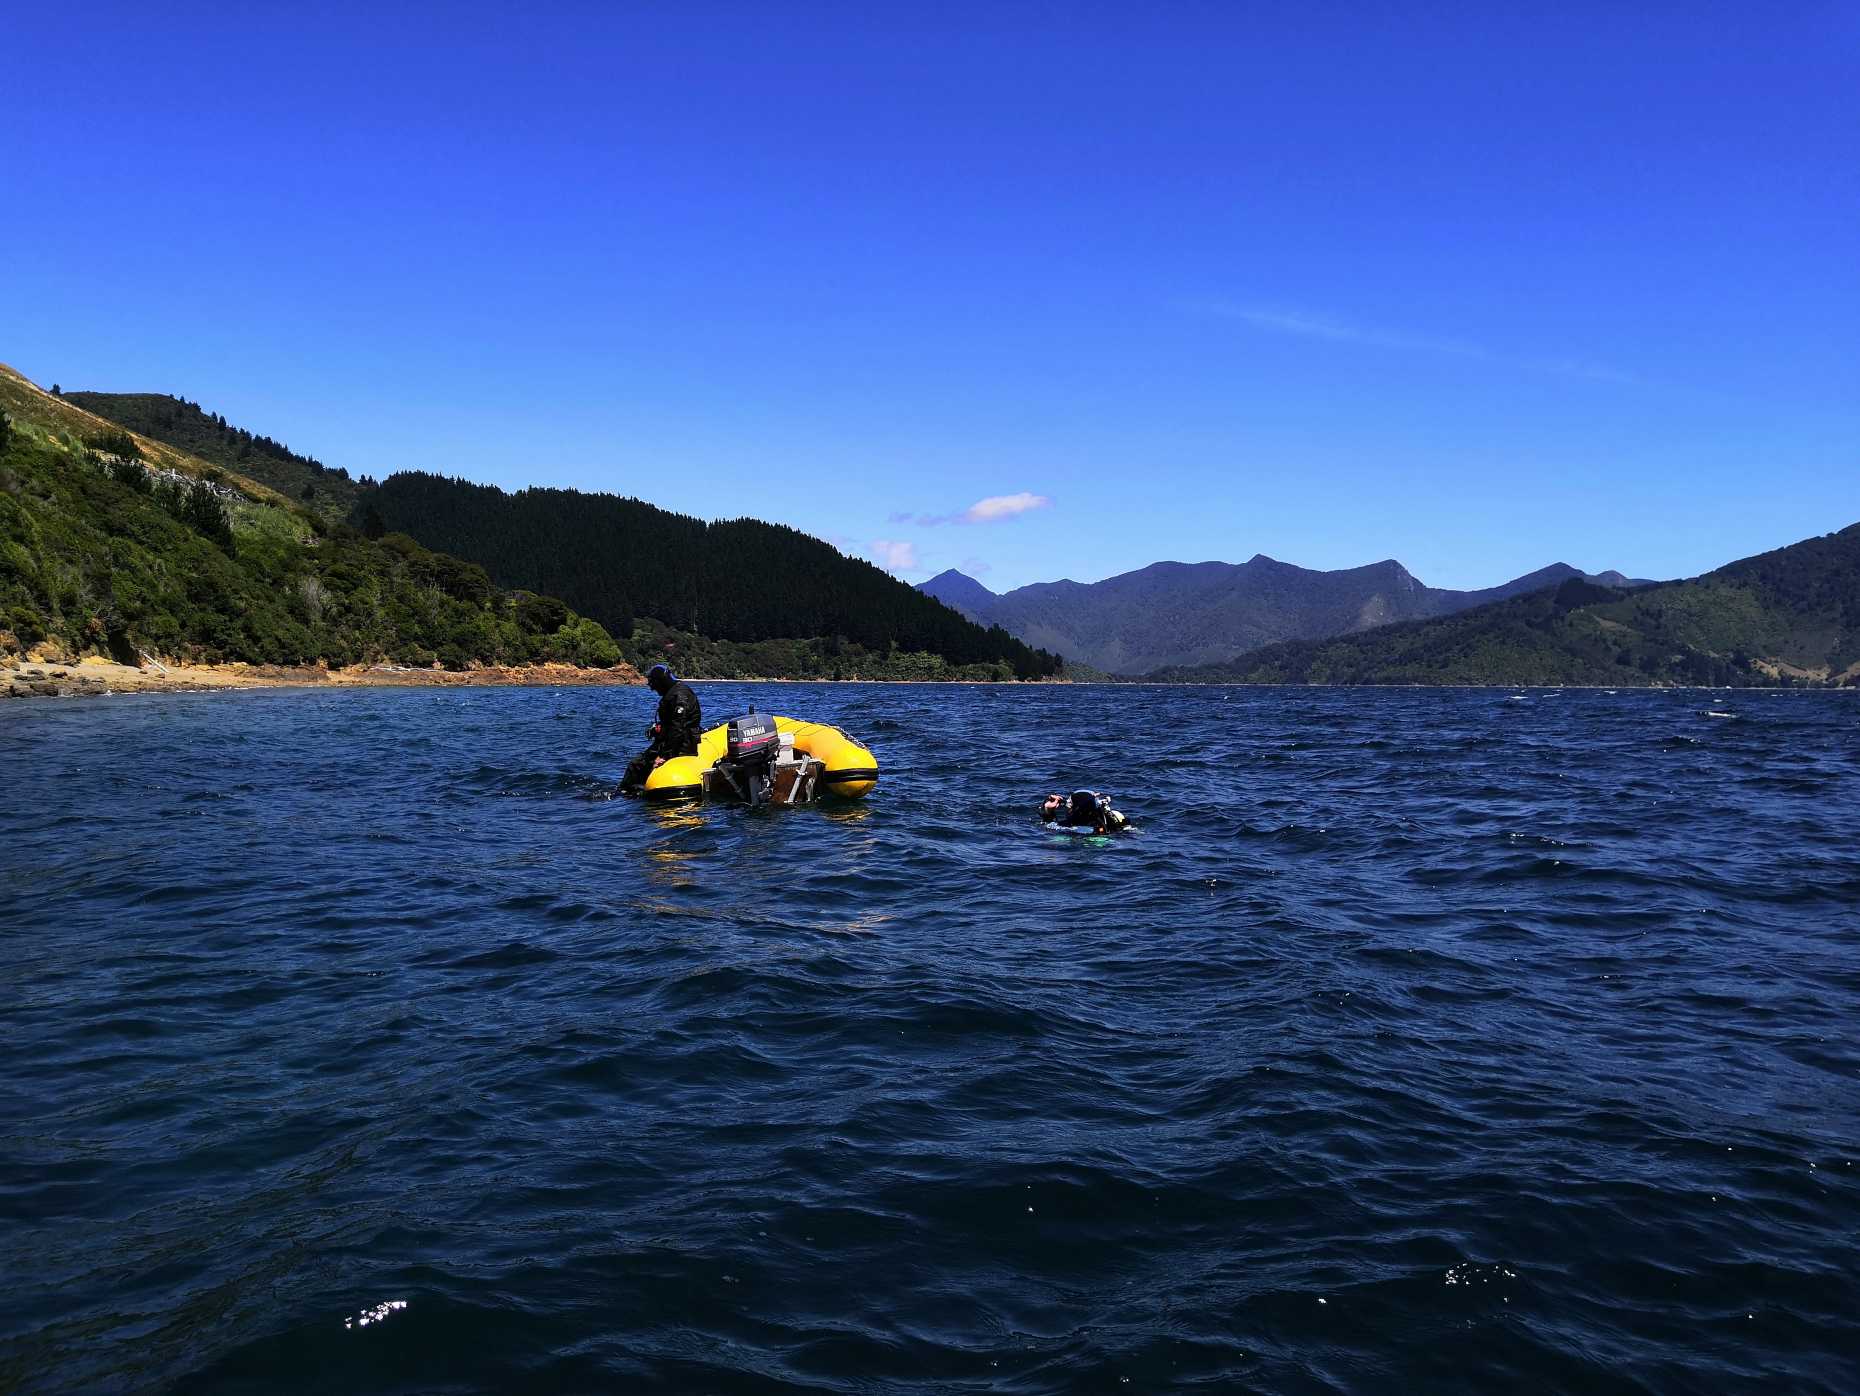 Michi's diving trip to New Zealand in 2019 to collect new samples.